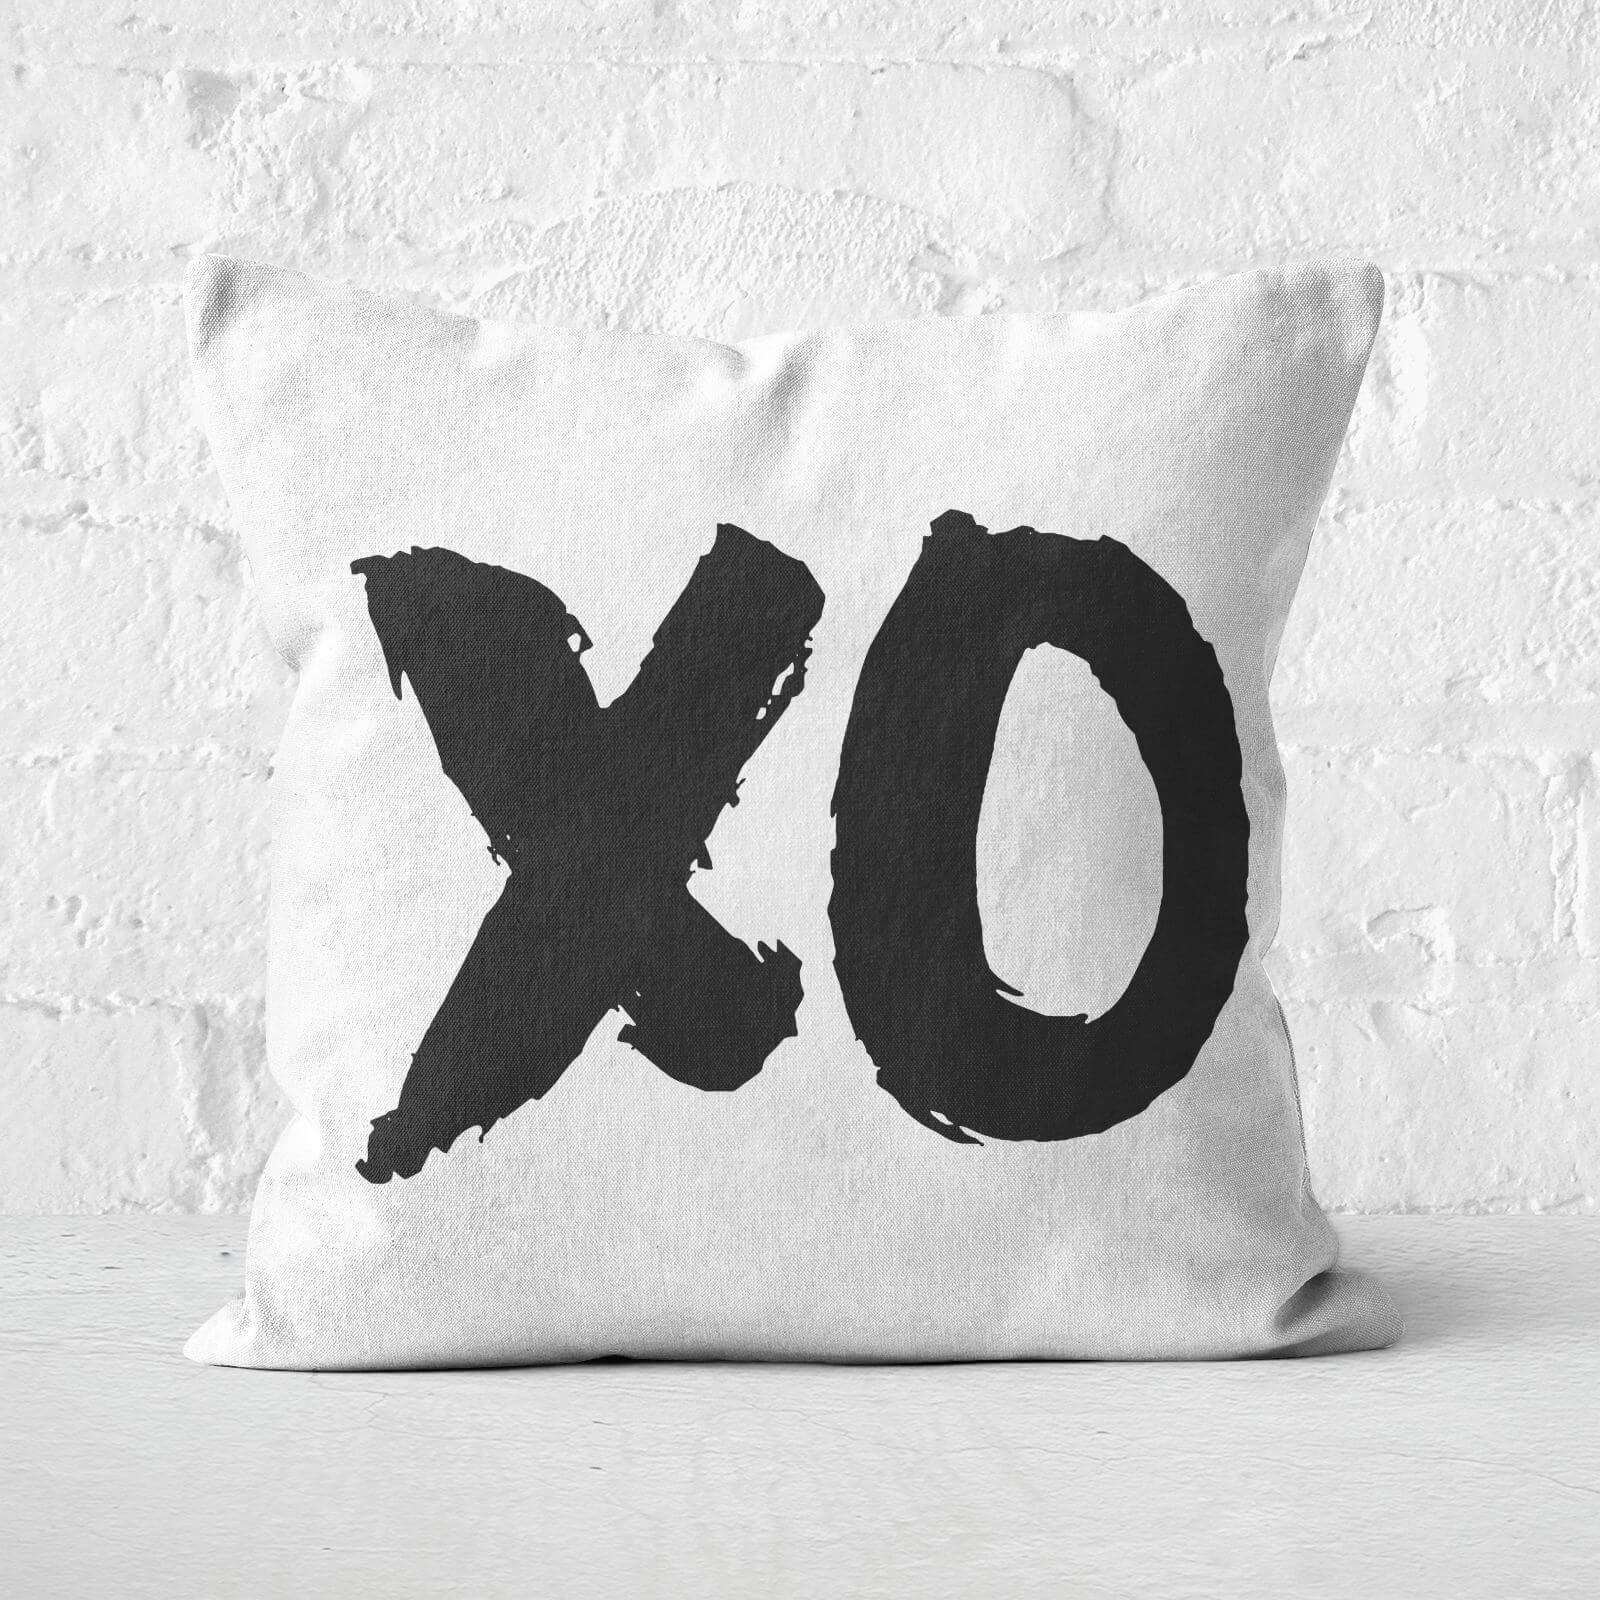 The Motivated Type XO Square Cushion - 60x60cm - Soft Touch